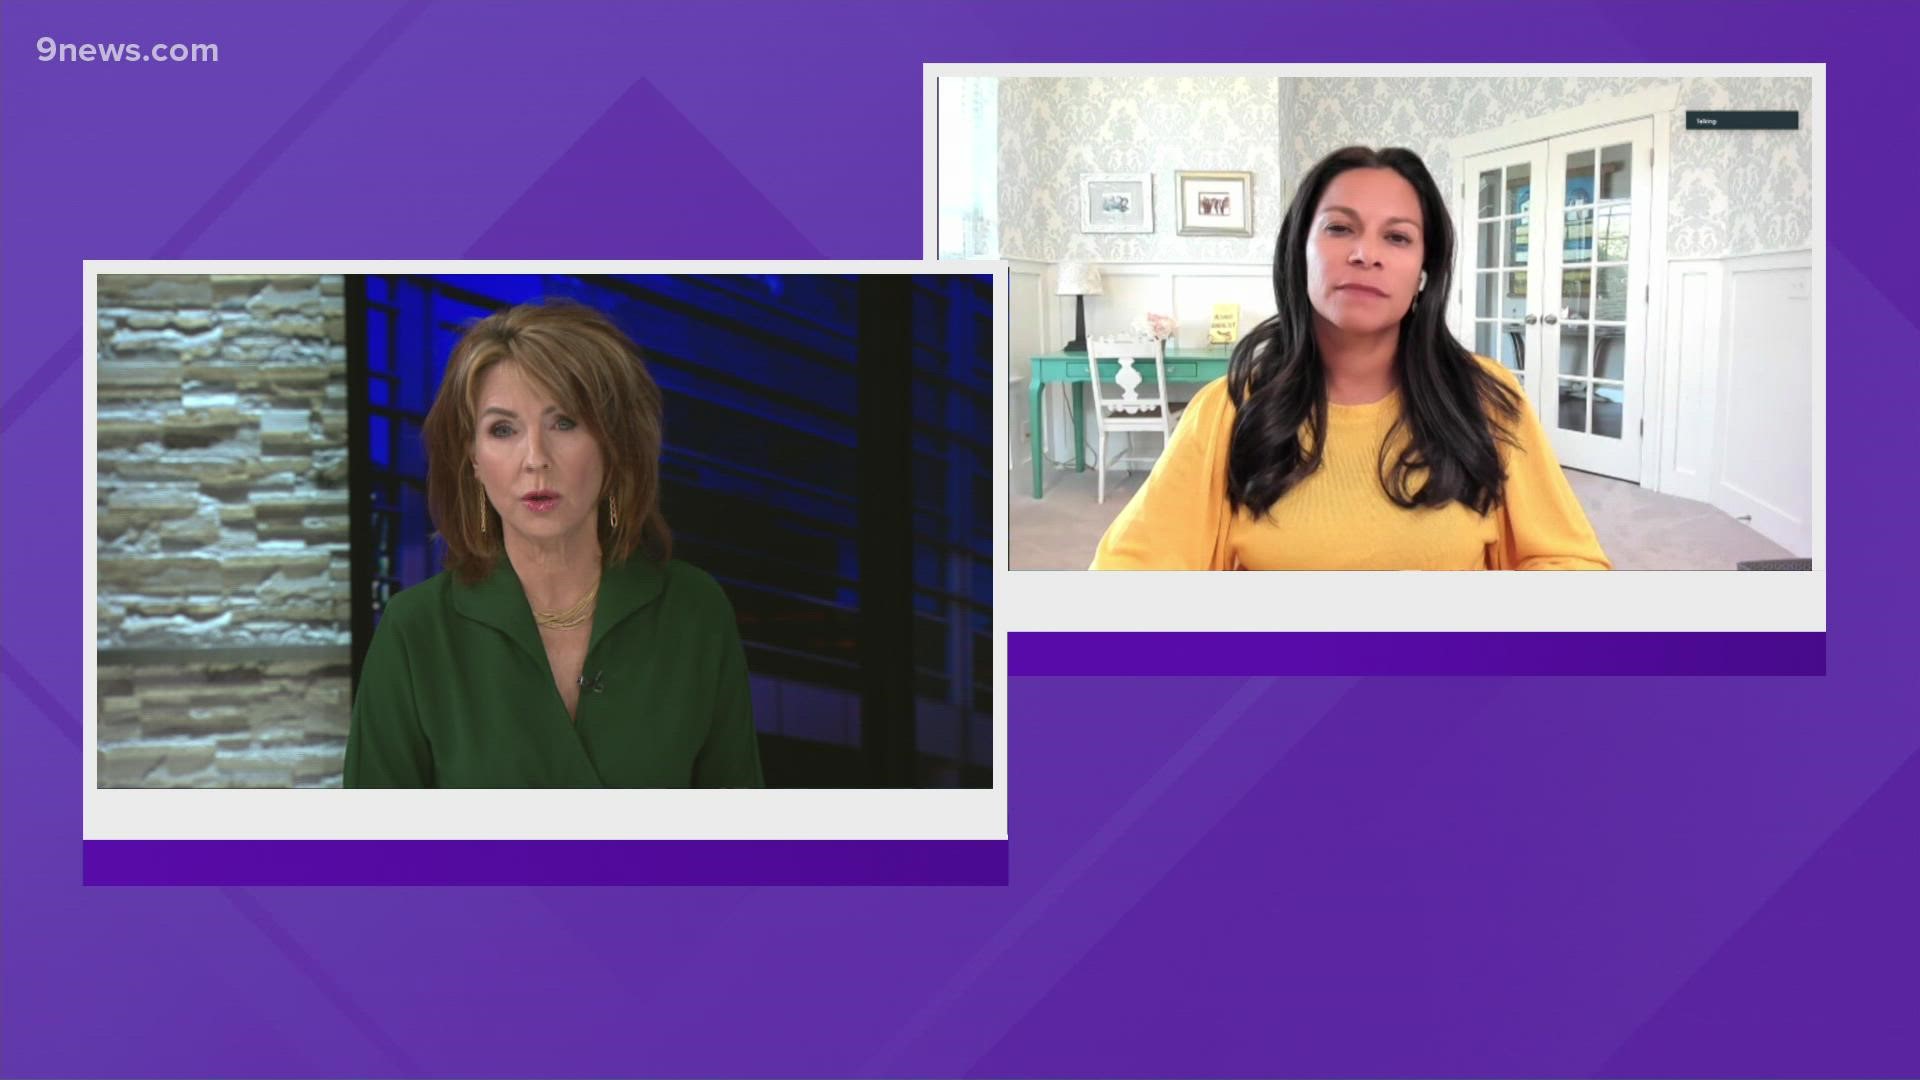 Psychologist and 9NEWS parenting expert Dr. Sheryl Ziegler discusses the factors involved in domestic violence, and how to help victims get out safely.